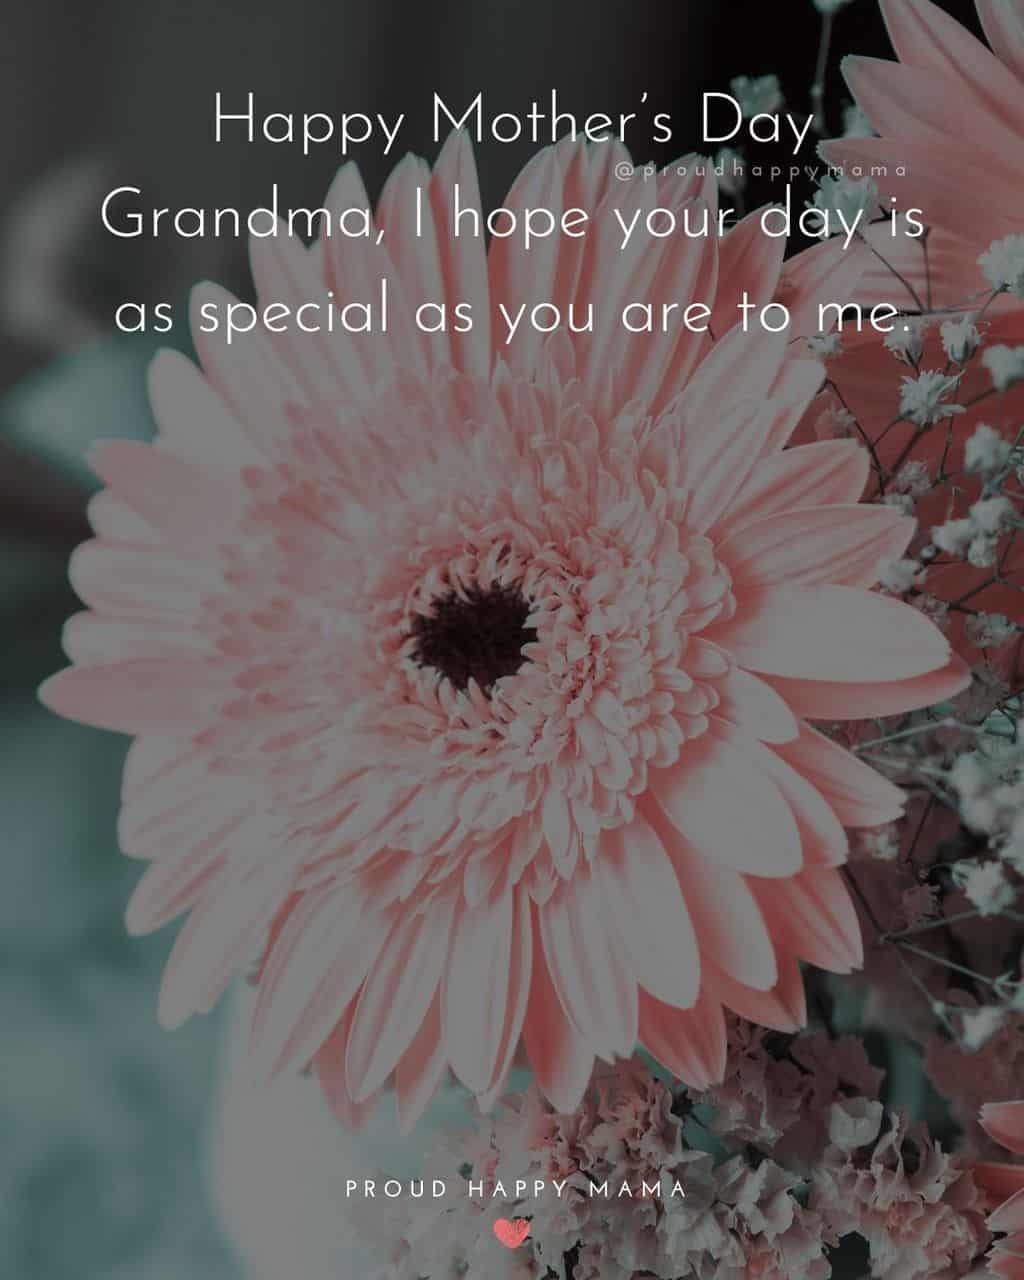 Happy Mothers Day Quotes To Grandma - Happy Mother’s Day Grandma, I hope your day is as special as you are to me.’